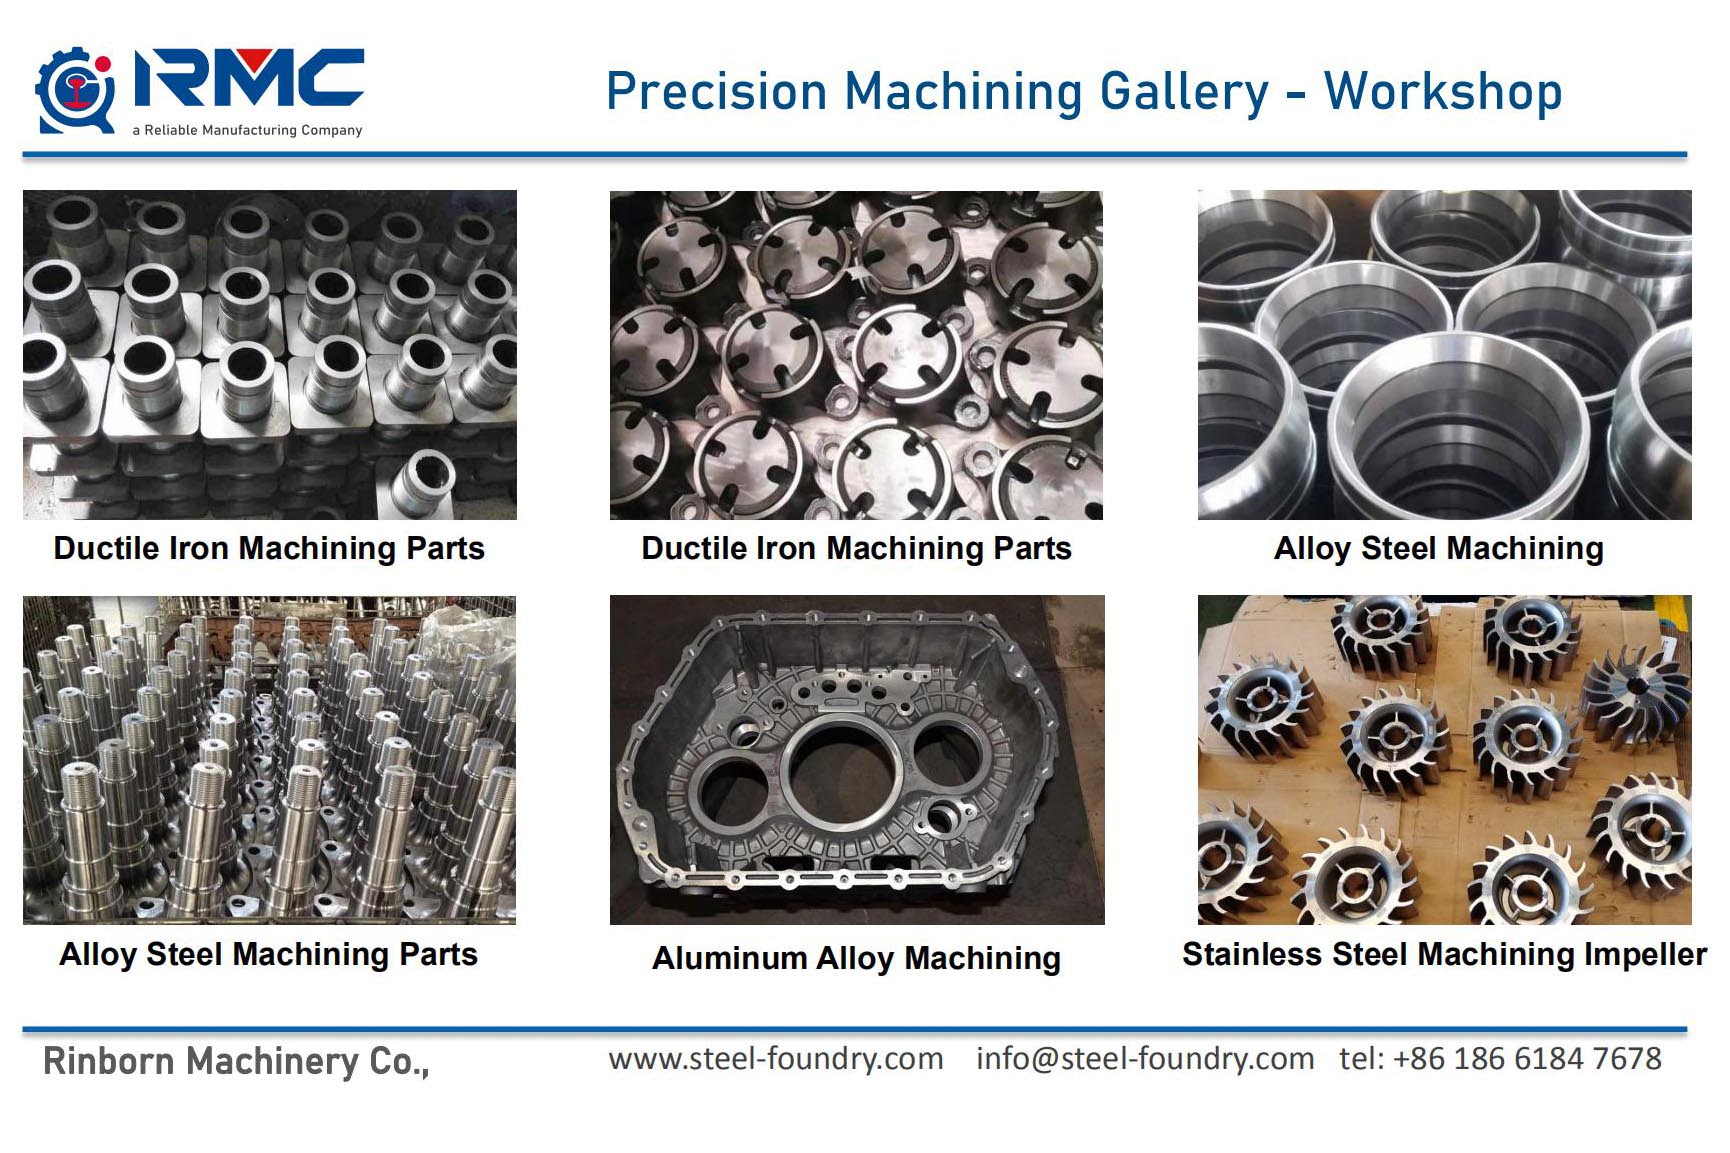 CNC Precision Machined Metal and Alloy Parts